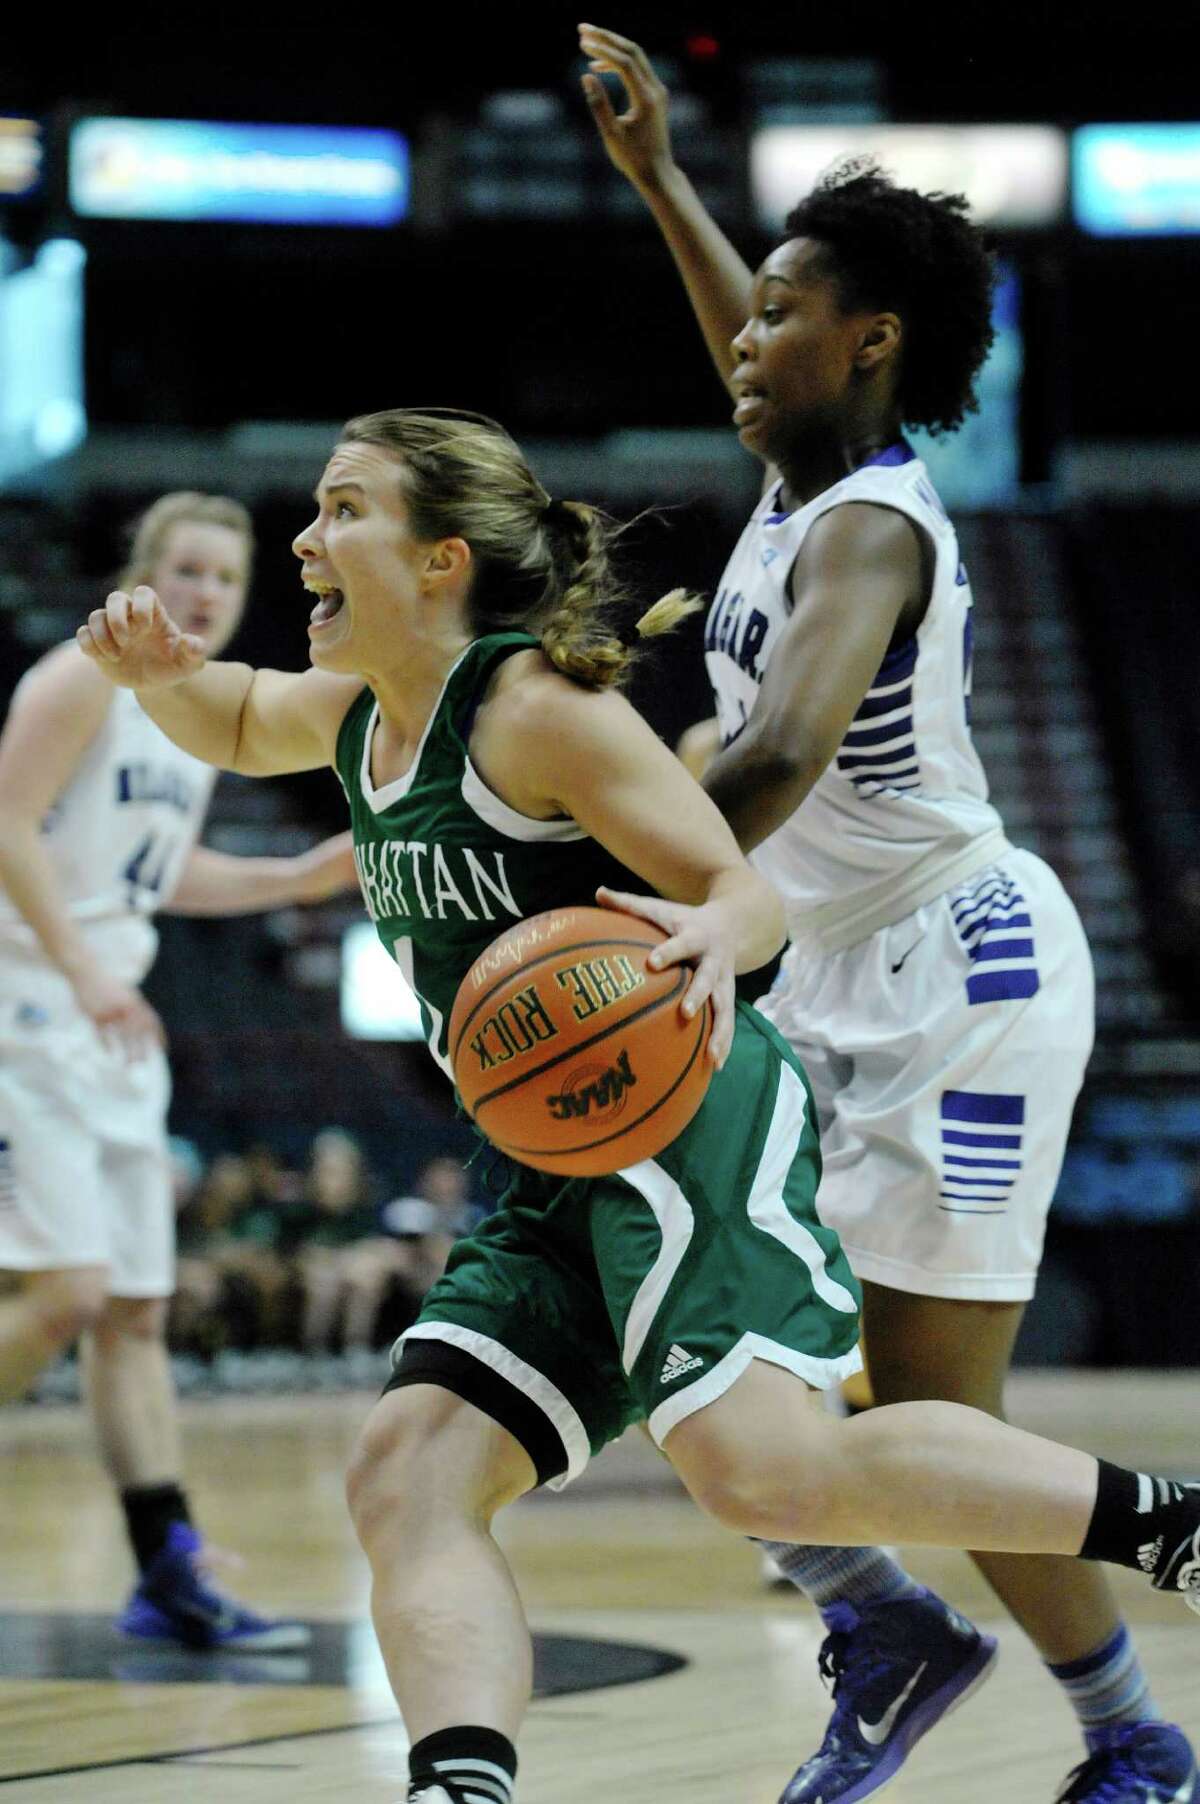 Jacqui Thompson of Manhattan, left, drives to the basket past Sylvia Maxwell of Niagara during their MAAC Tournament game at the Times Union Center on Thursday, March 5, 2015, in Albany, N.Y. (Paul Buckowski / Times Union)